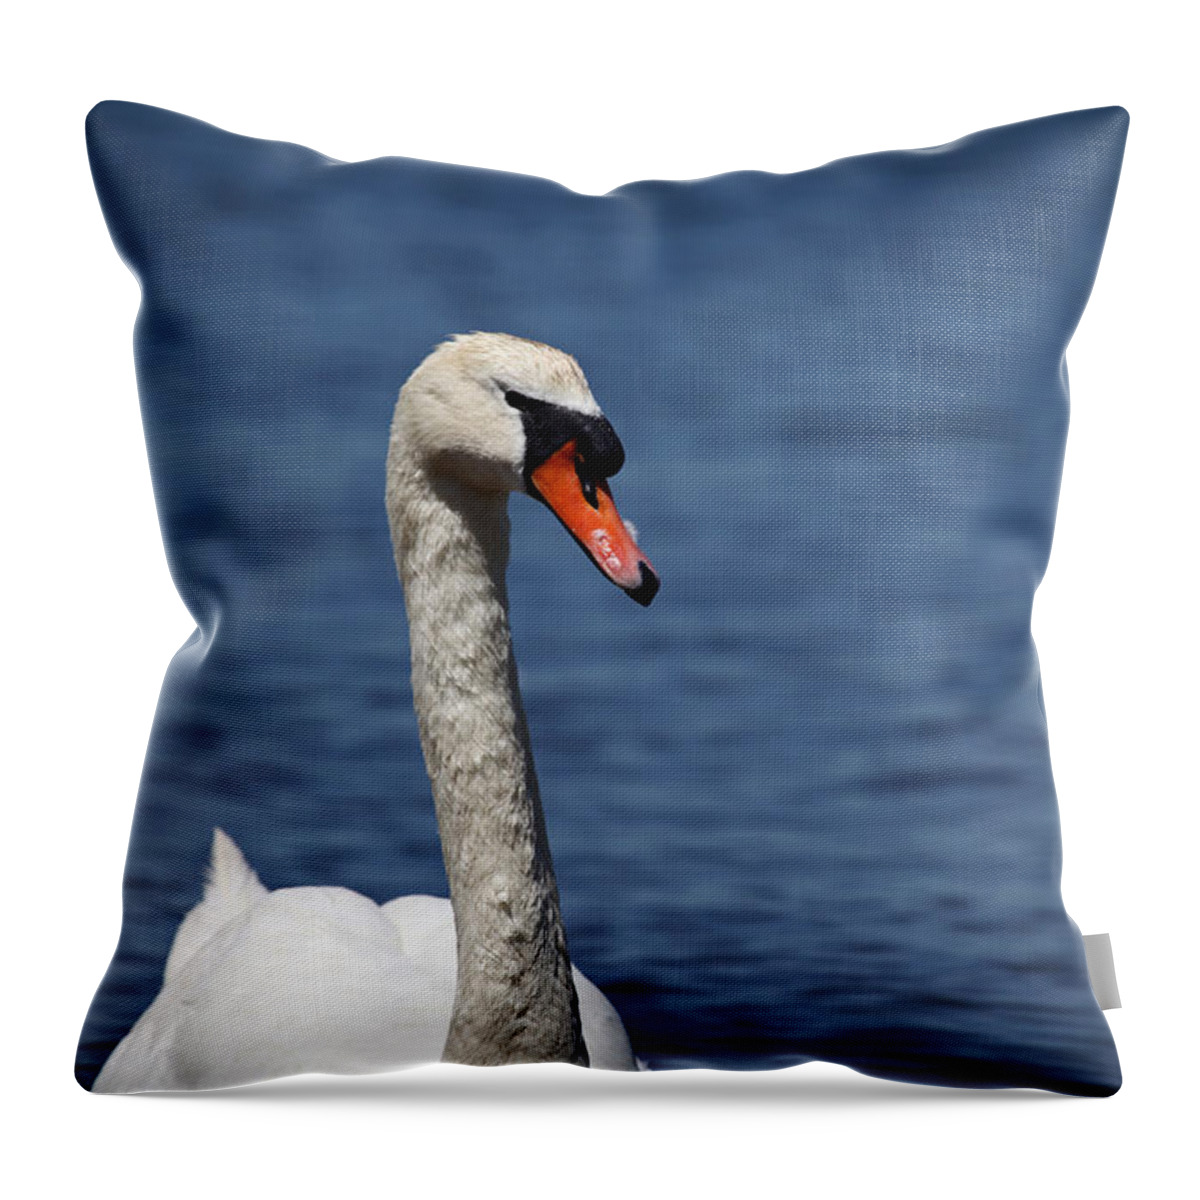 Swan Throw Pillow featuring the photograph The Mute Swan by Karol Livote